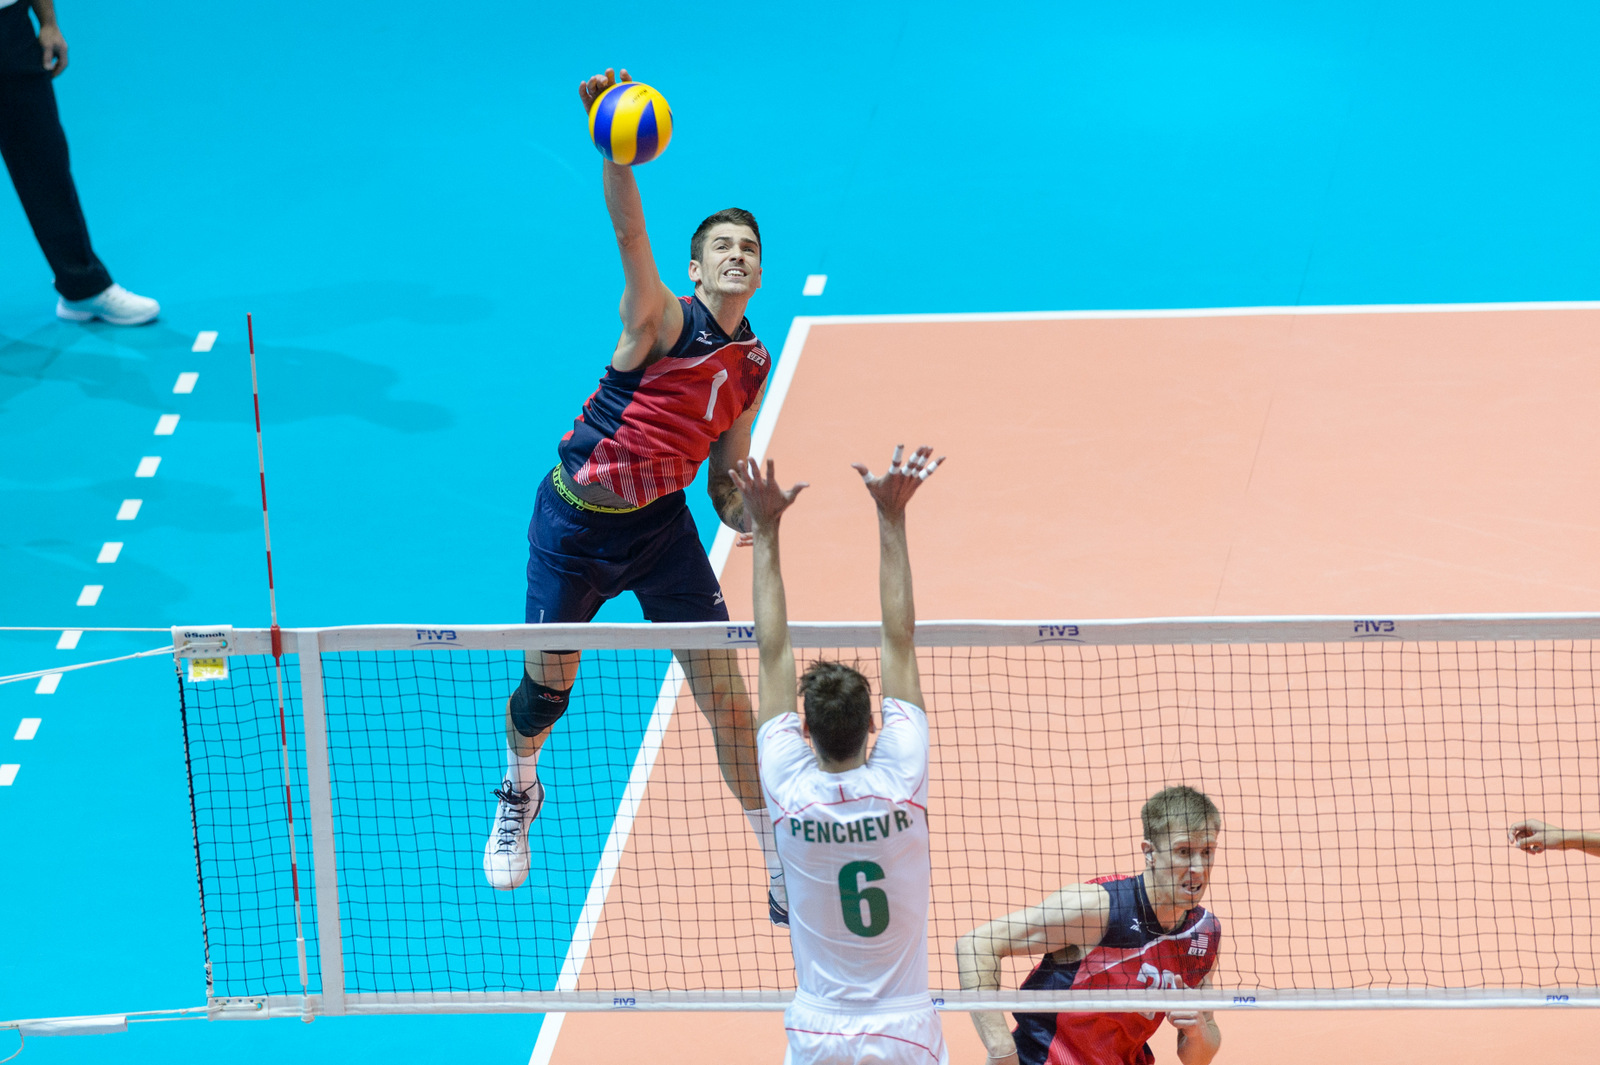 USA's Matthew Anderson (1) spikes during a FIVB Men's Volleyball World League match between the USA and Bulgaria in Dallas, Texas.